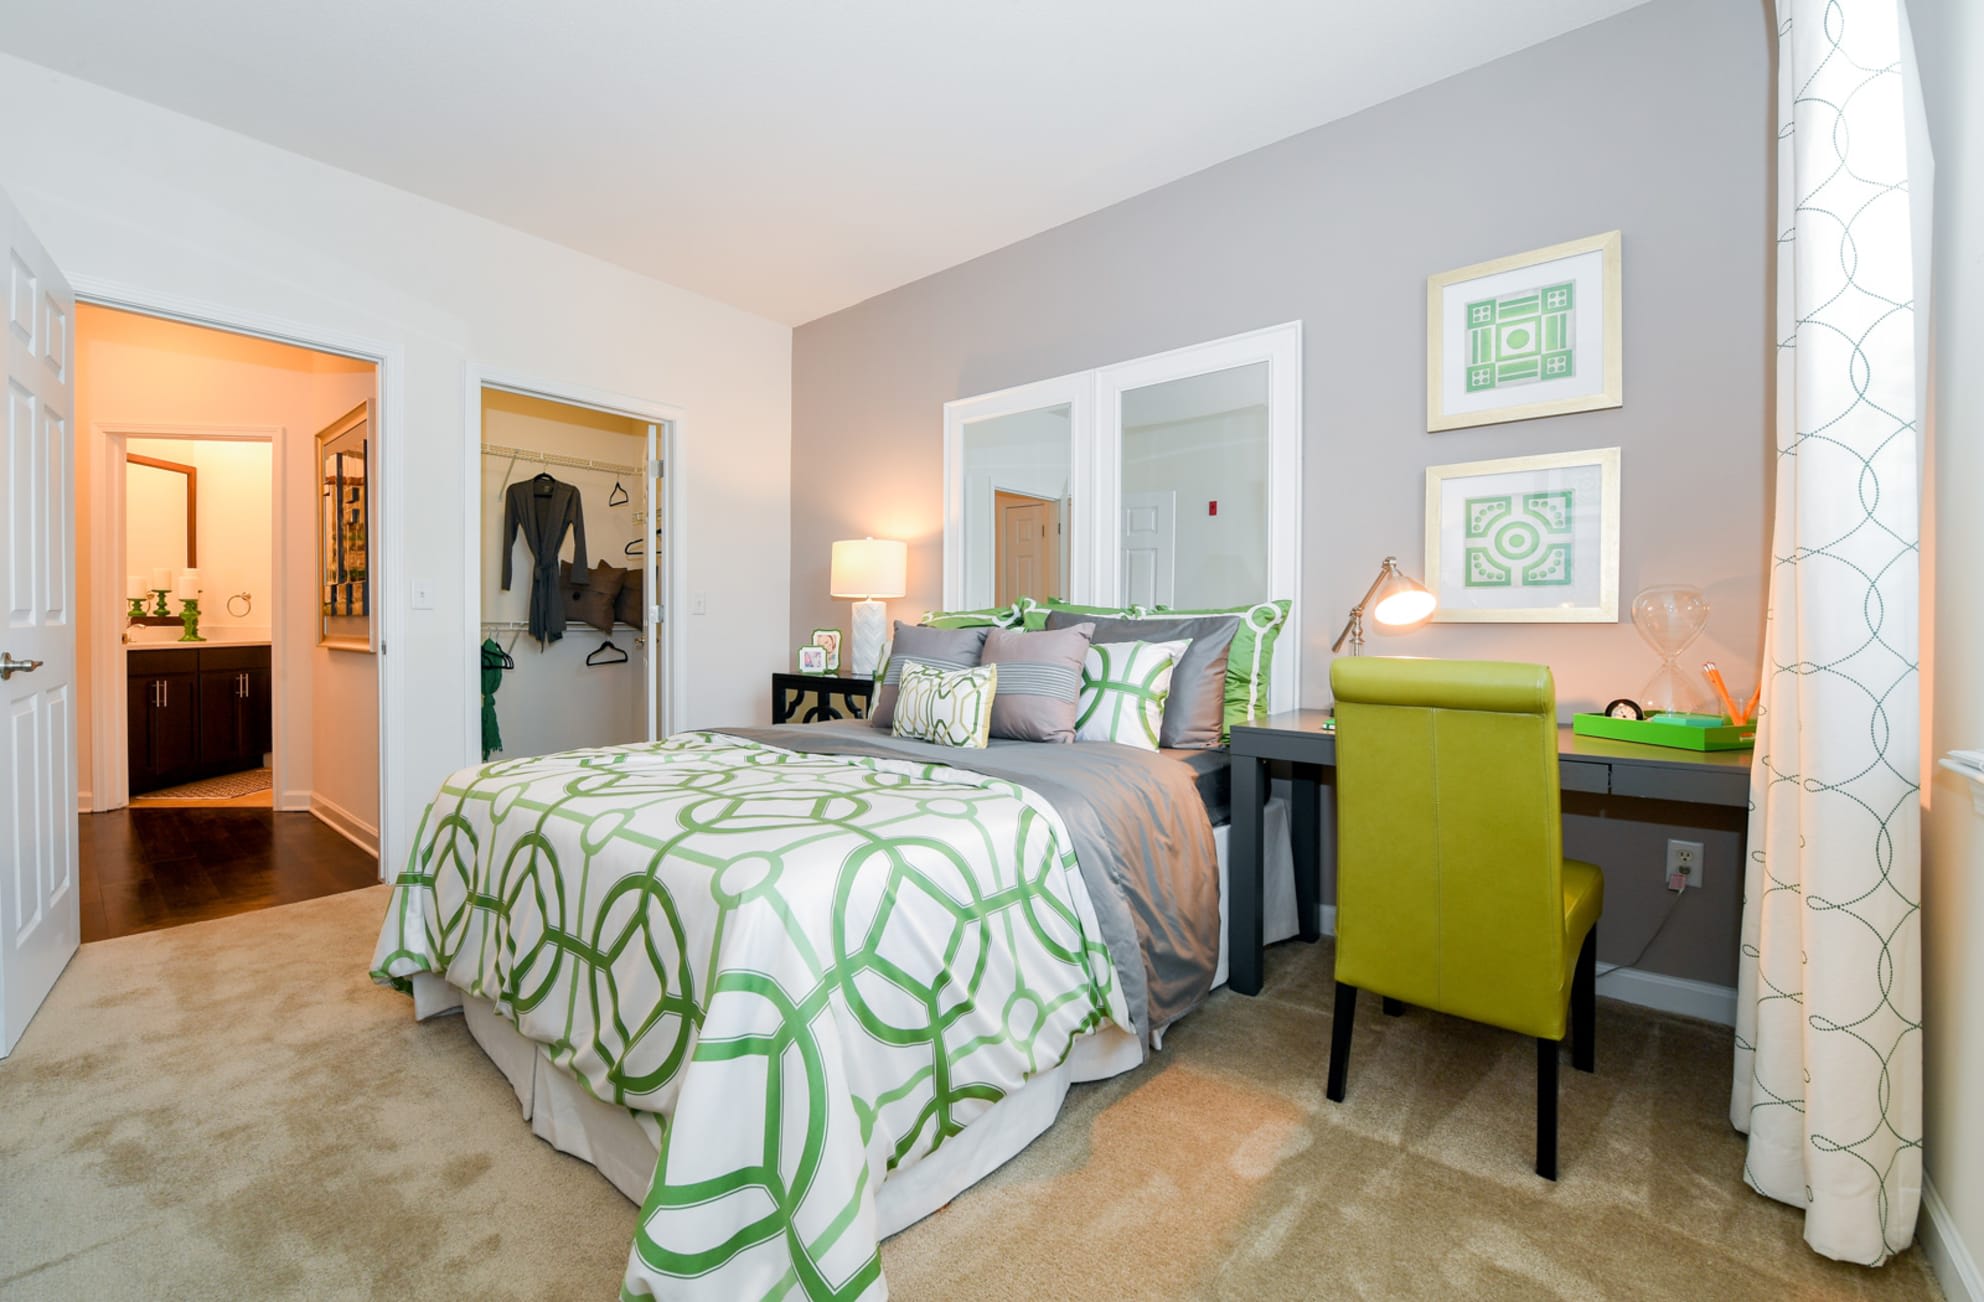 Bedroom with modern details at Reserve at Wauwatosa Village in Wauwatosa, Wisconsin